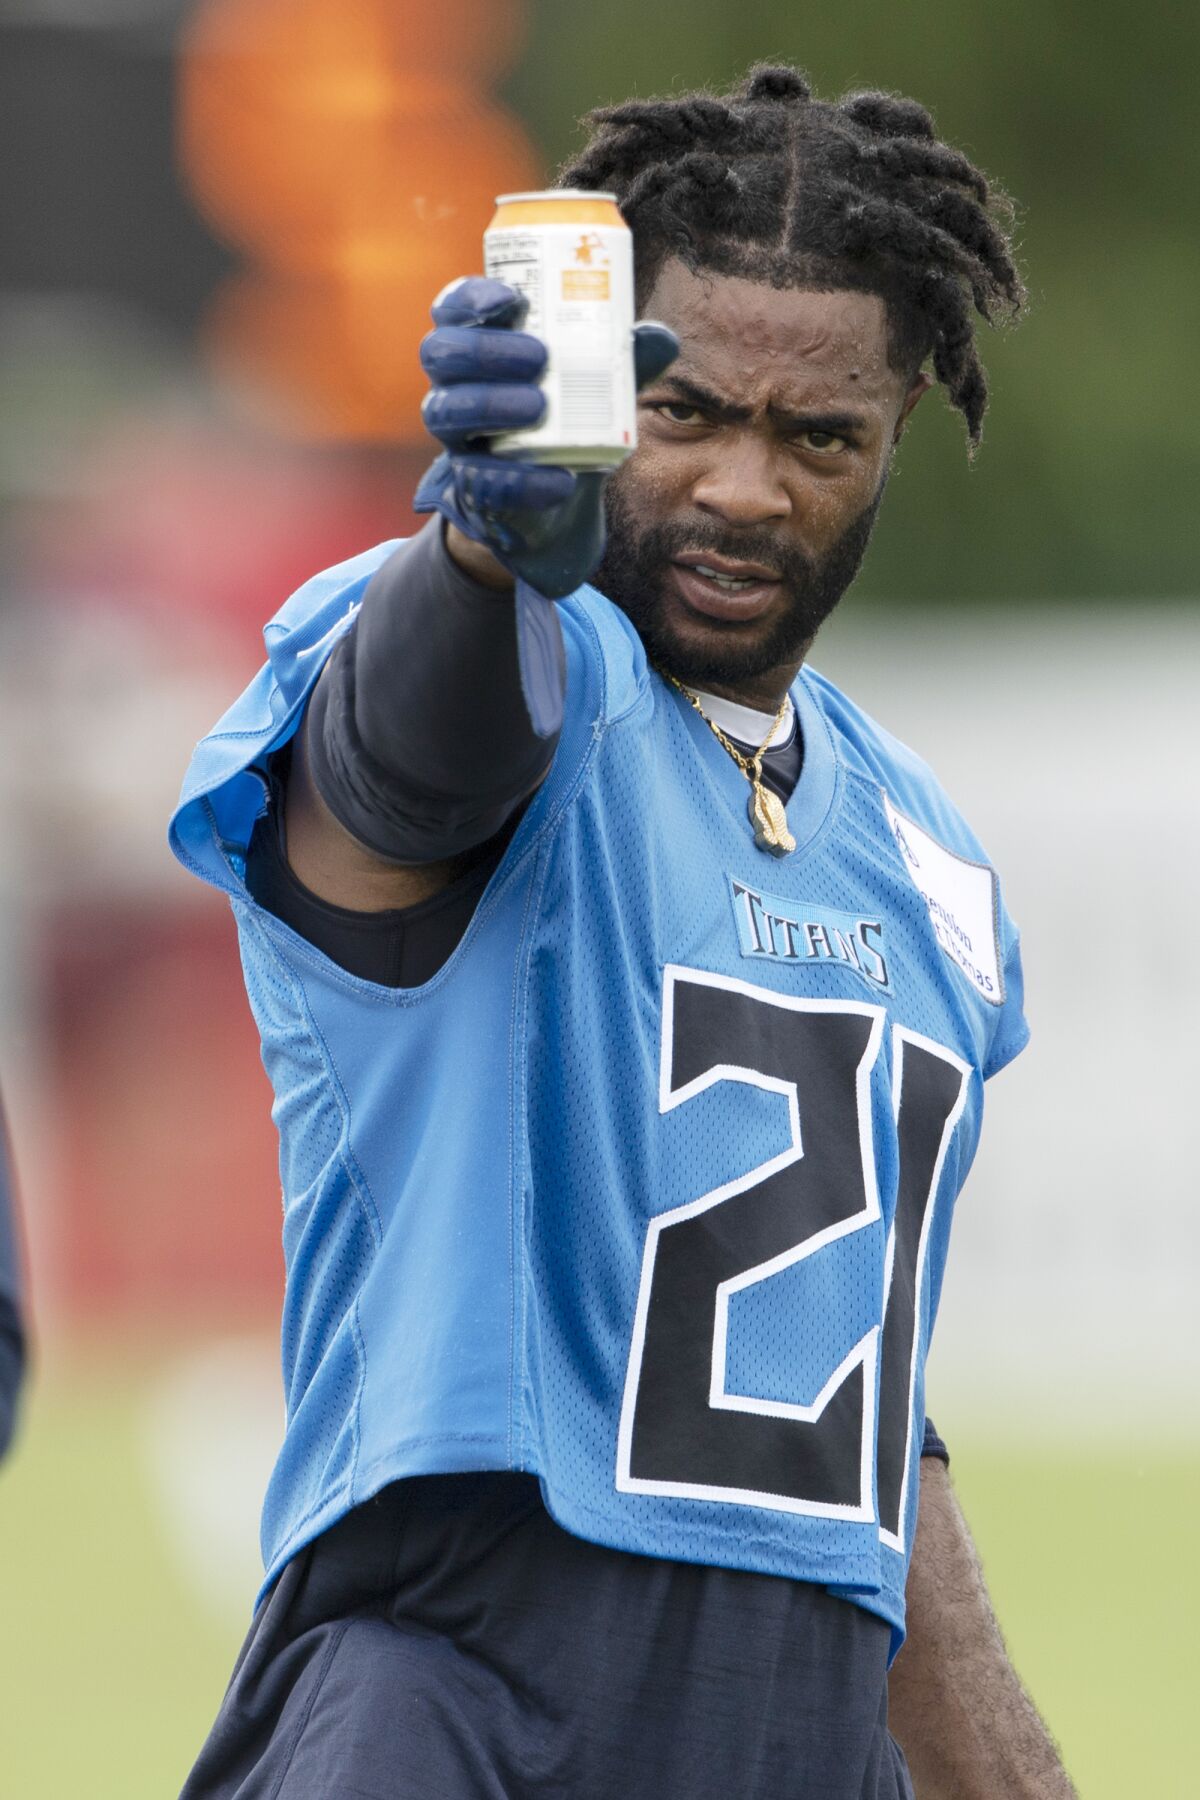 Tennessee Titans cornerback Malcolm Butler (21) takes a drink during NFL football training camp Friday, Aug. 14, 2020, in Nashville, Tenn. (George Walker IV/Pool Photo via AP)